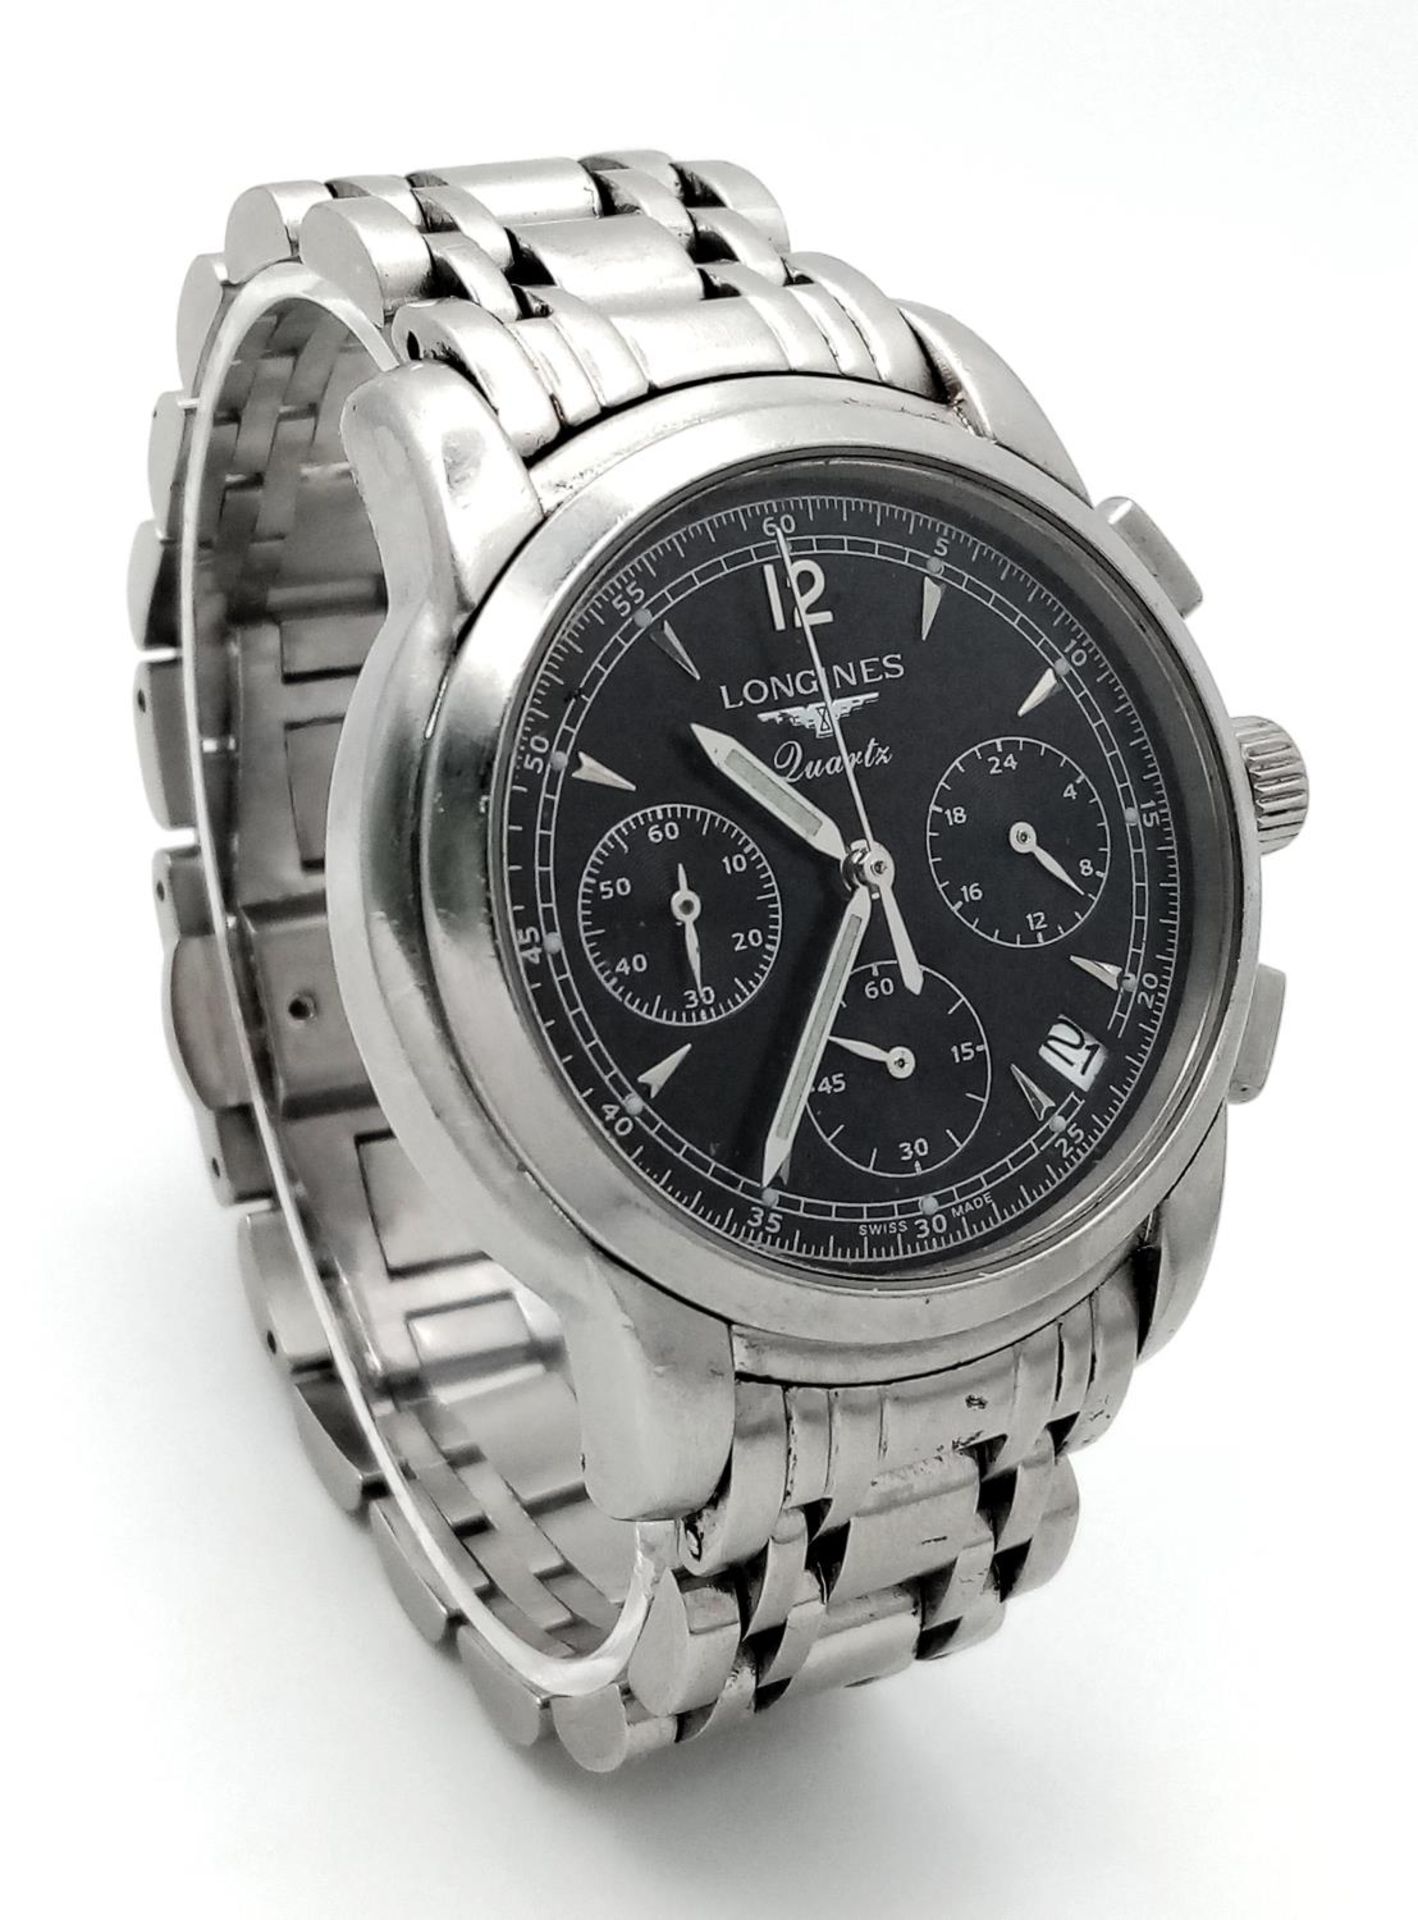 A Longine Quartz Chronograph Gents Watch. Stainless steel bracelet and case - 39mm. Black dial - Image 3 of 9